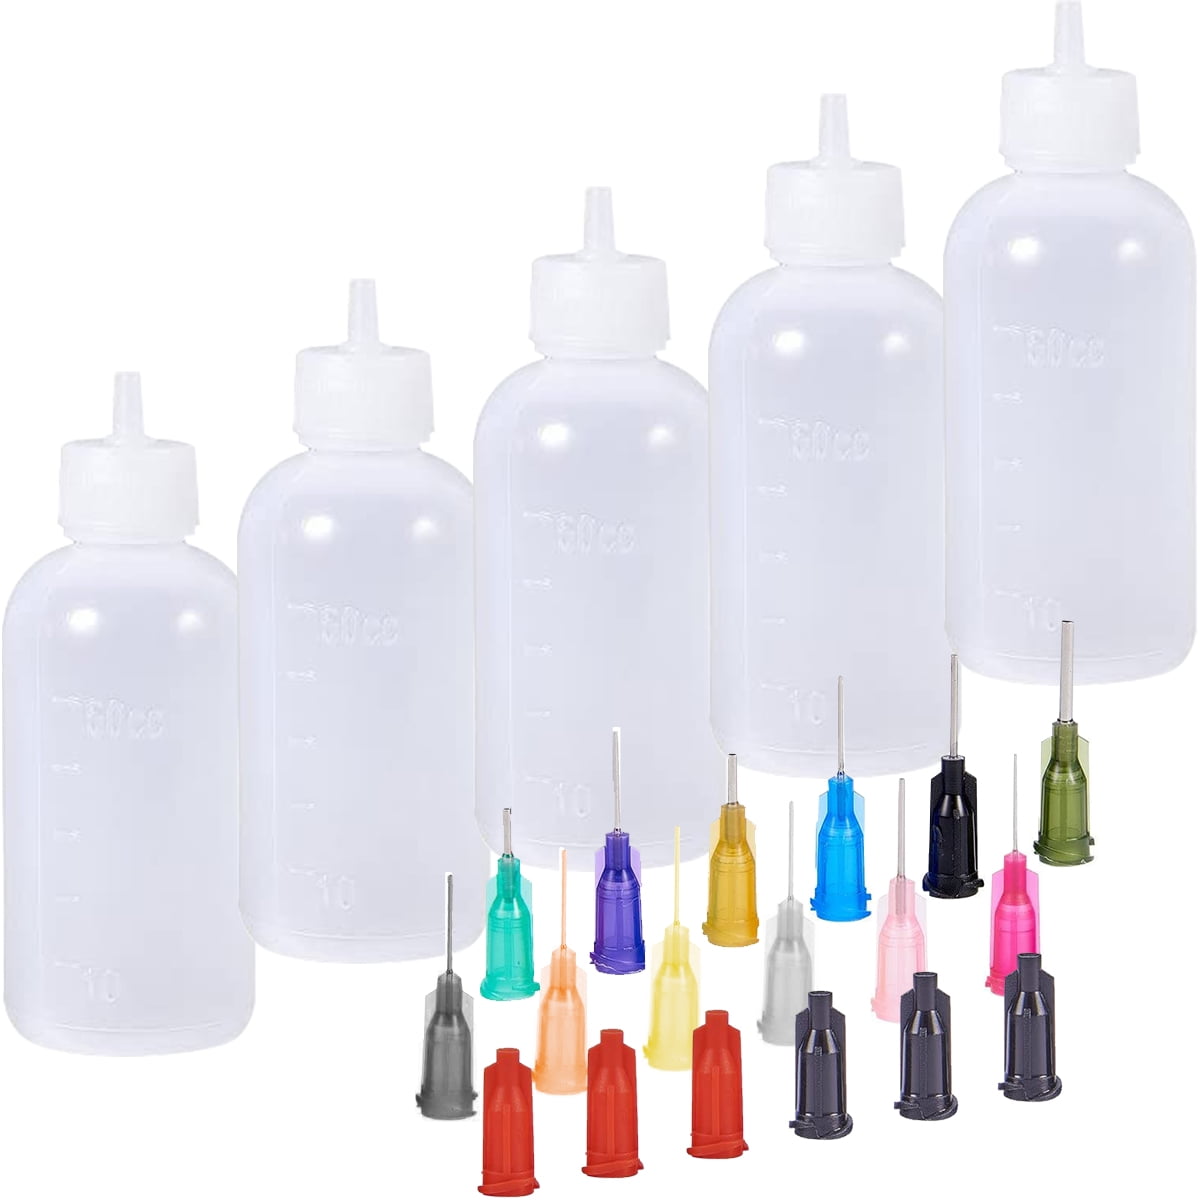 PRECISION TIP APPLICATOR BOTTLE-Quilled Creations/Paper  Tool-Quilling-Glue/Glaze